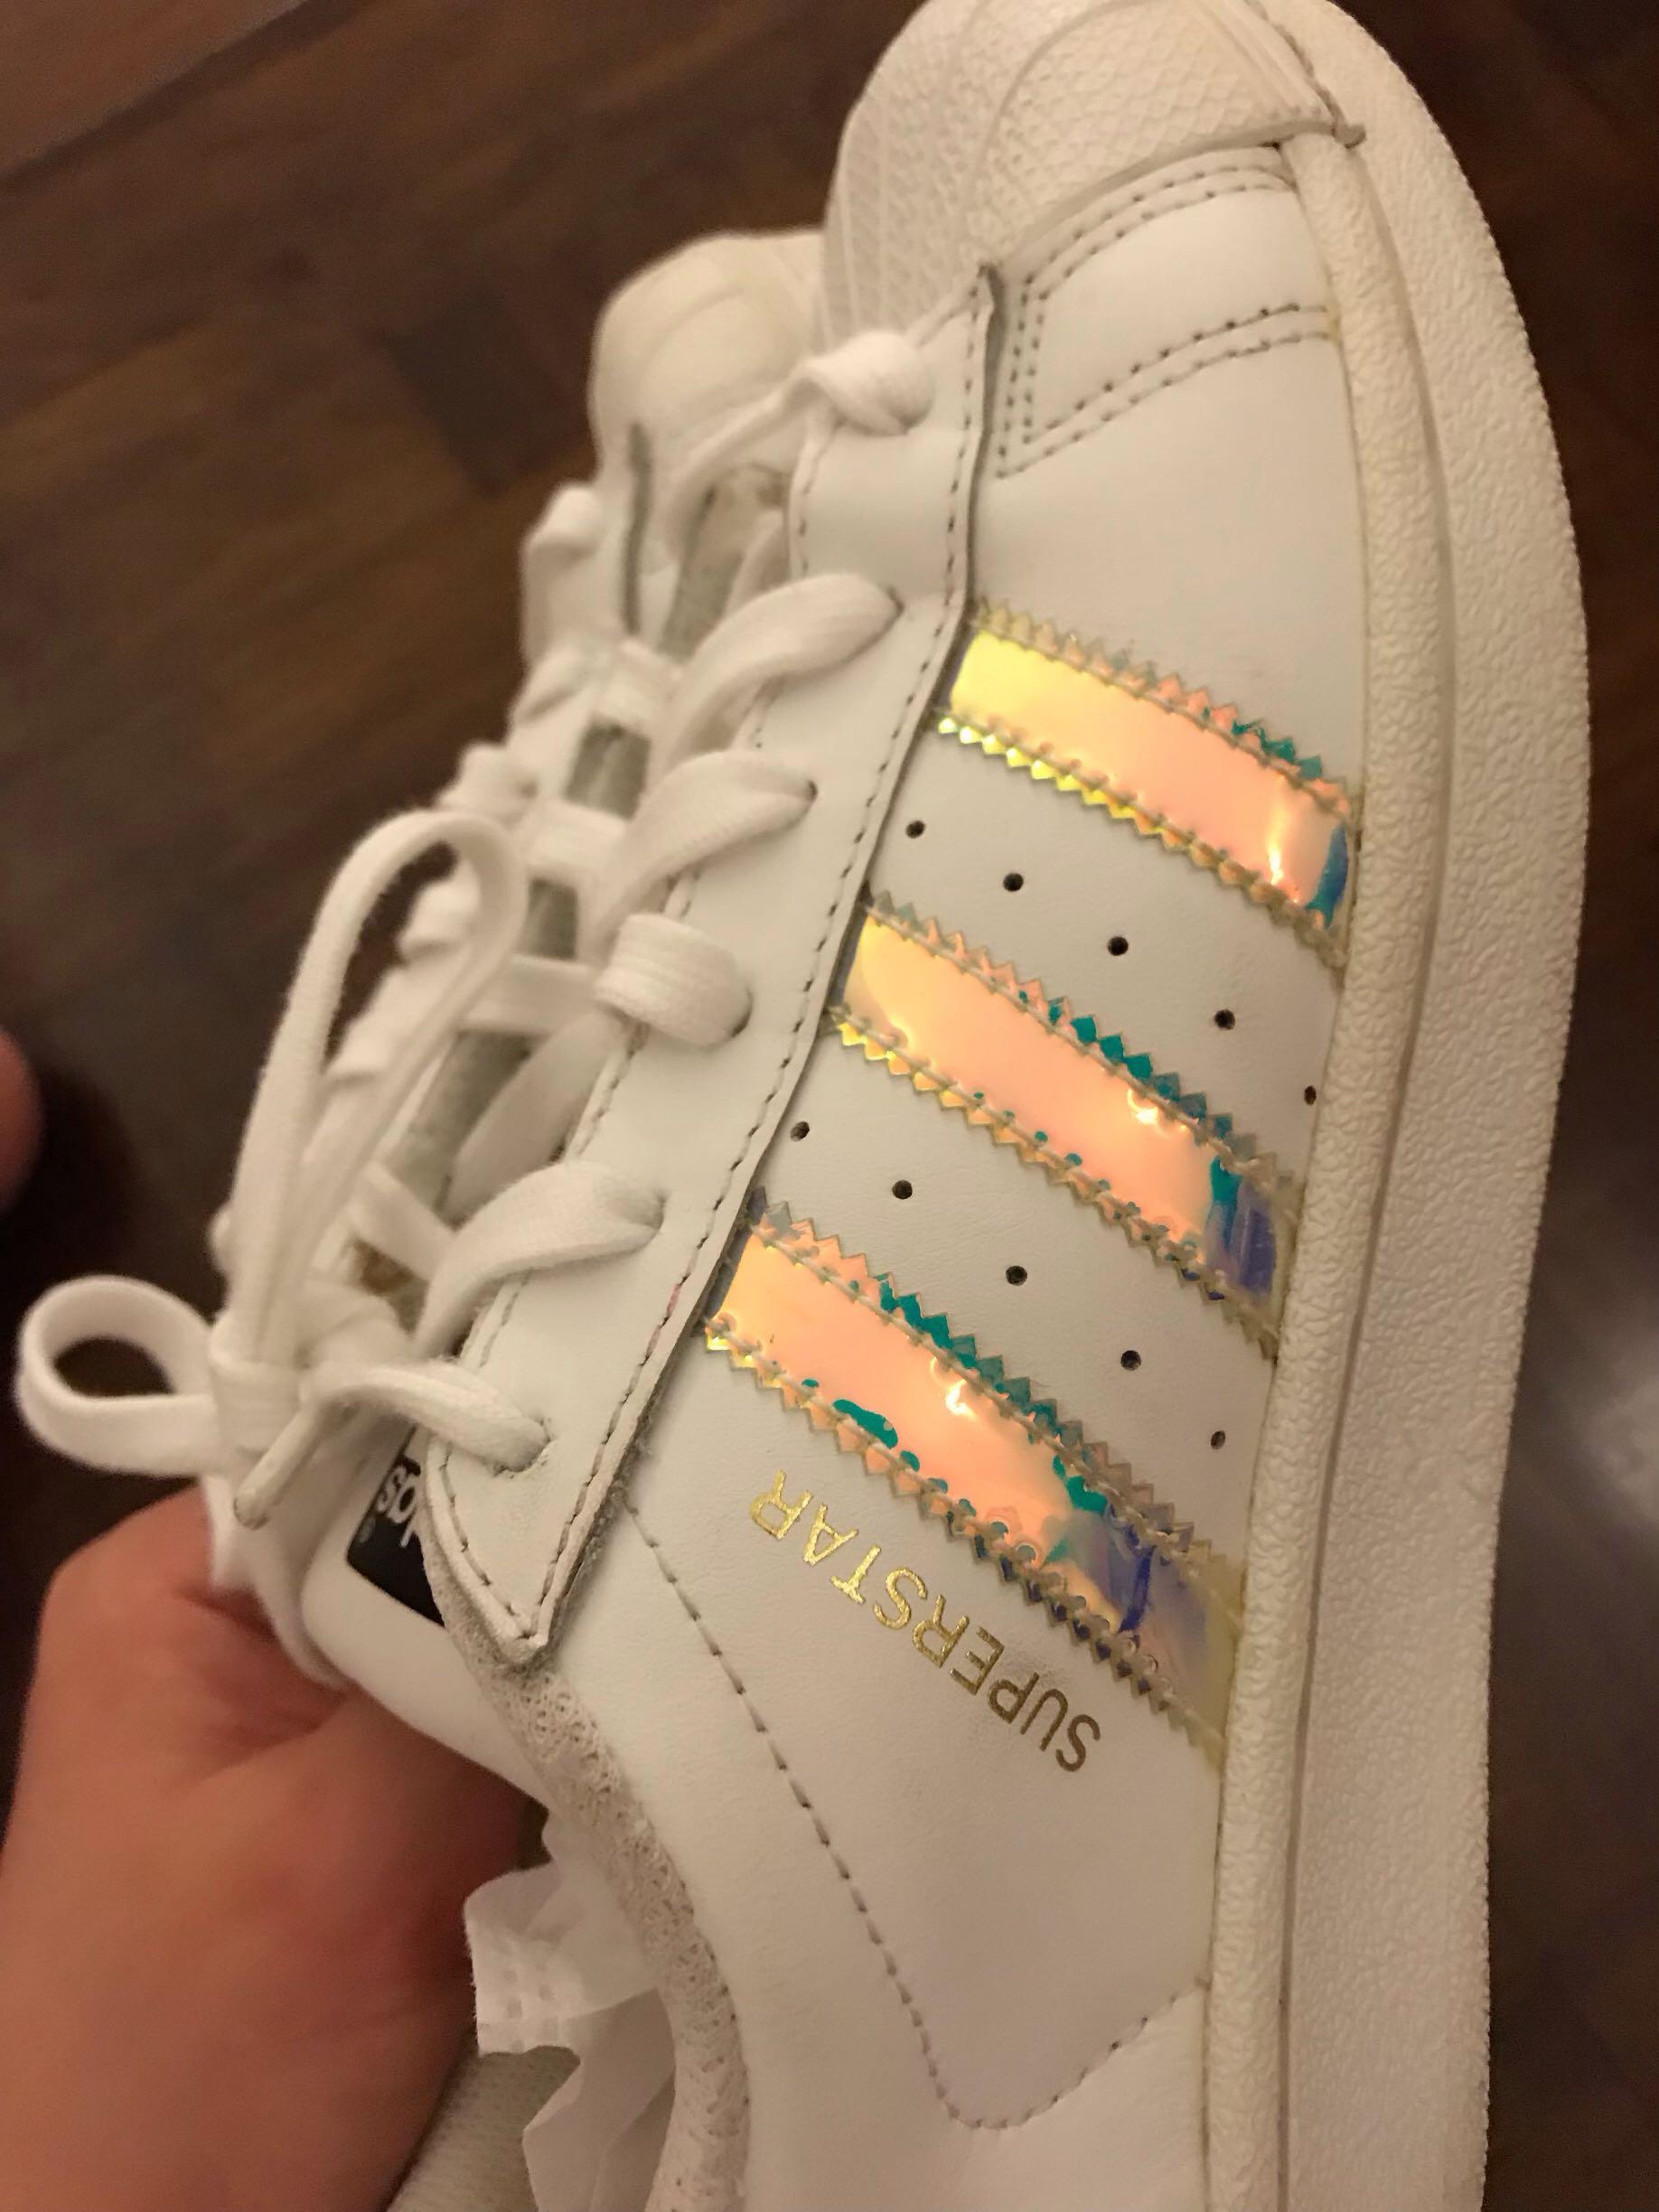 Adidas Superstar Shoes (Holographic Stripes) in UK Size 3.5, Fashion, Footwear, Sneakers on Carousell